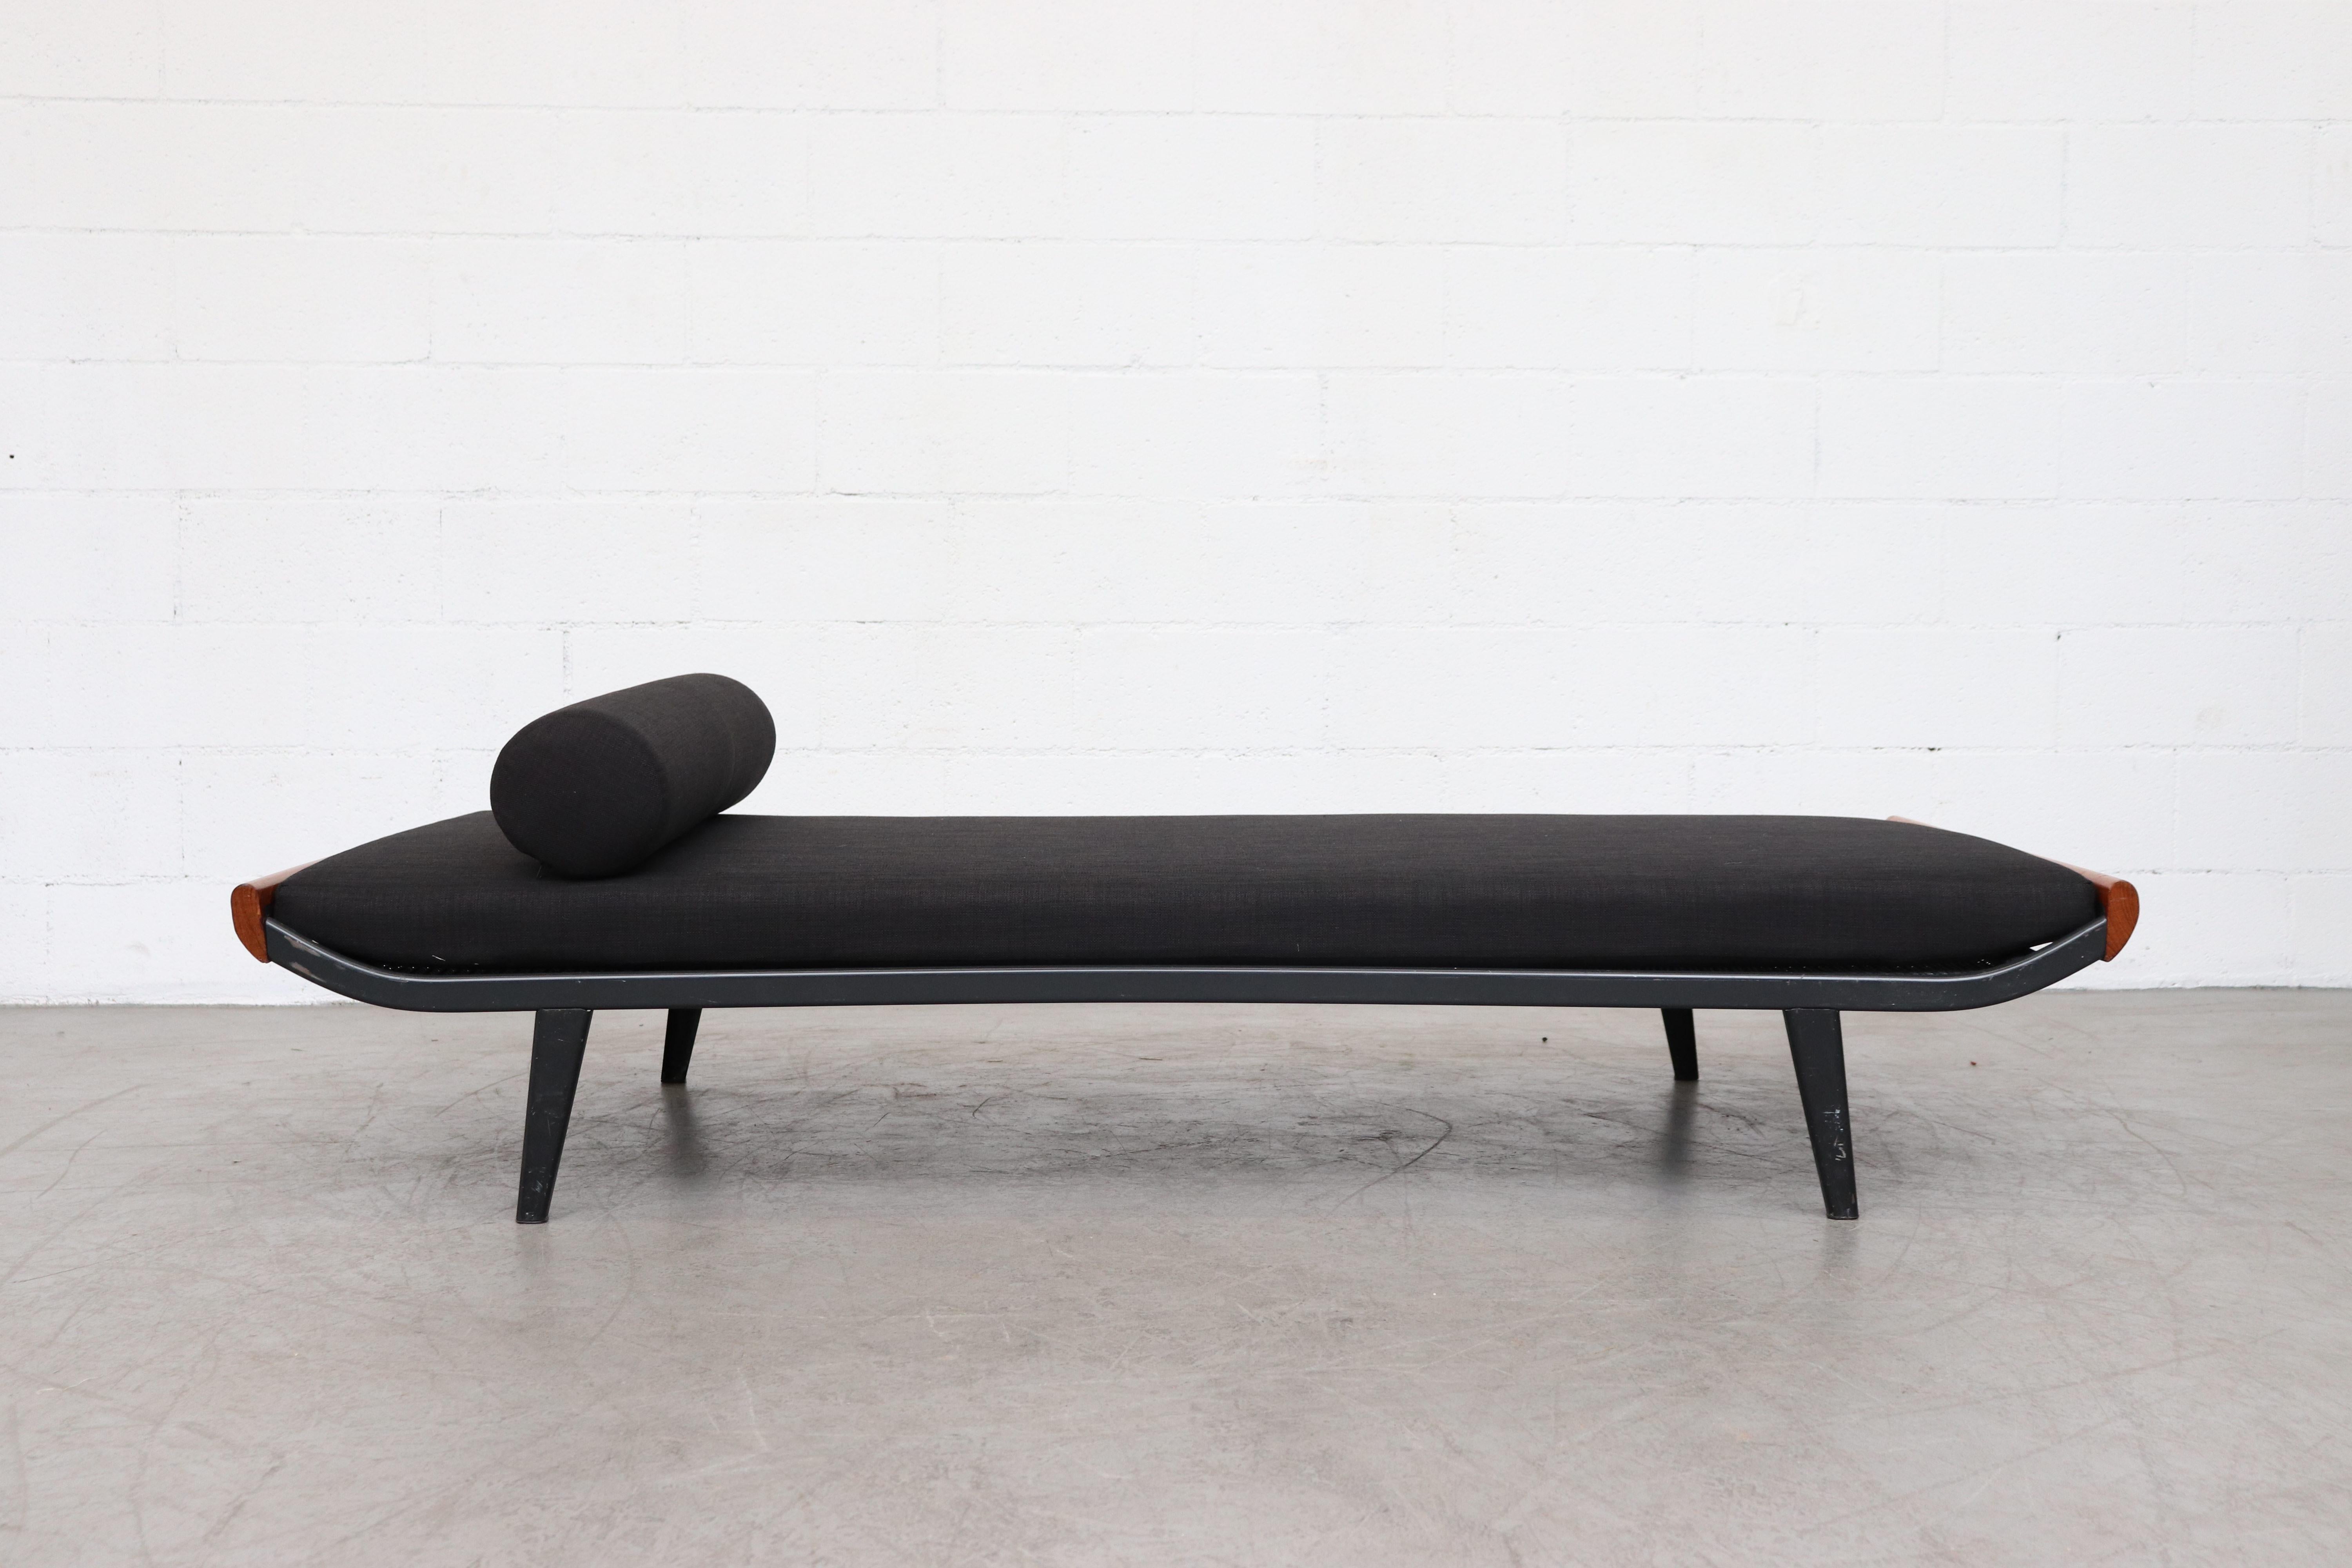 1960s Cleopatra day bed by A.R. Cordemeyer. Teak wood ends with enameled dark grey, almost black enameled metal frame and 